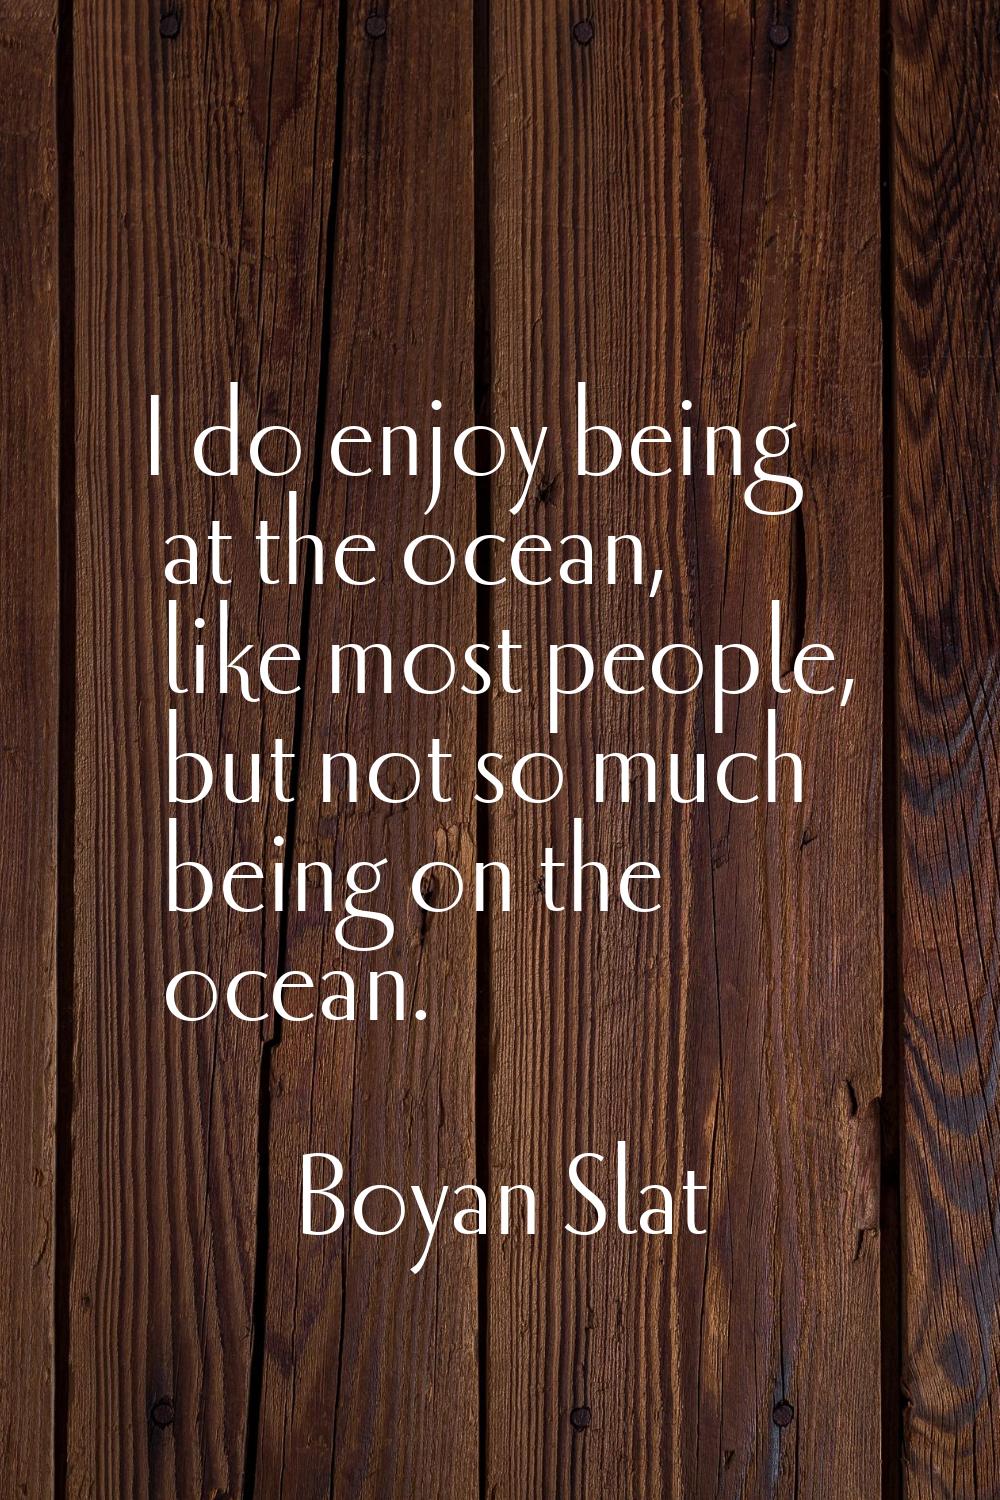 I do enjoy being at the ocean, like most people, but not so much being on the ocean.